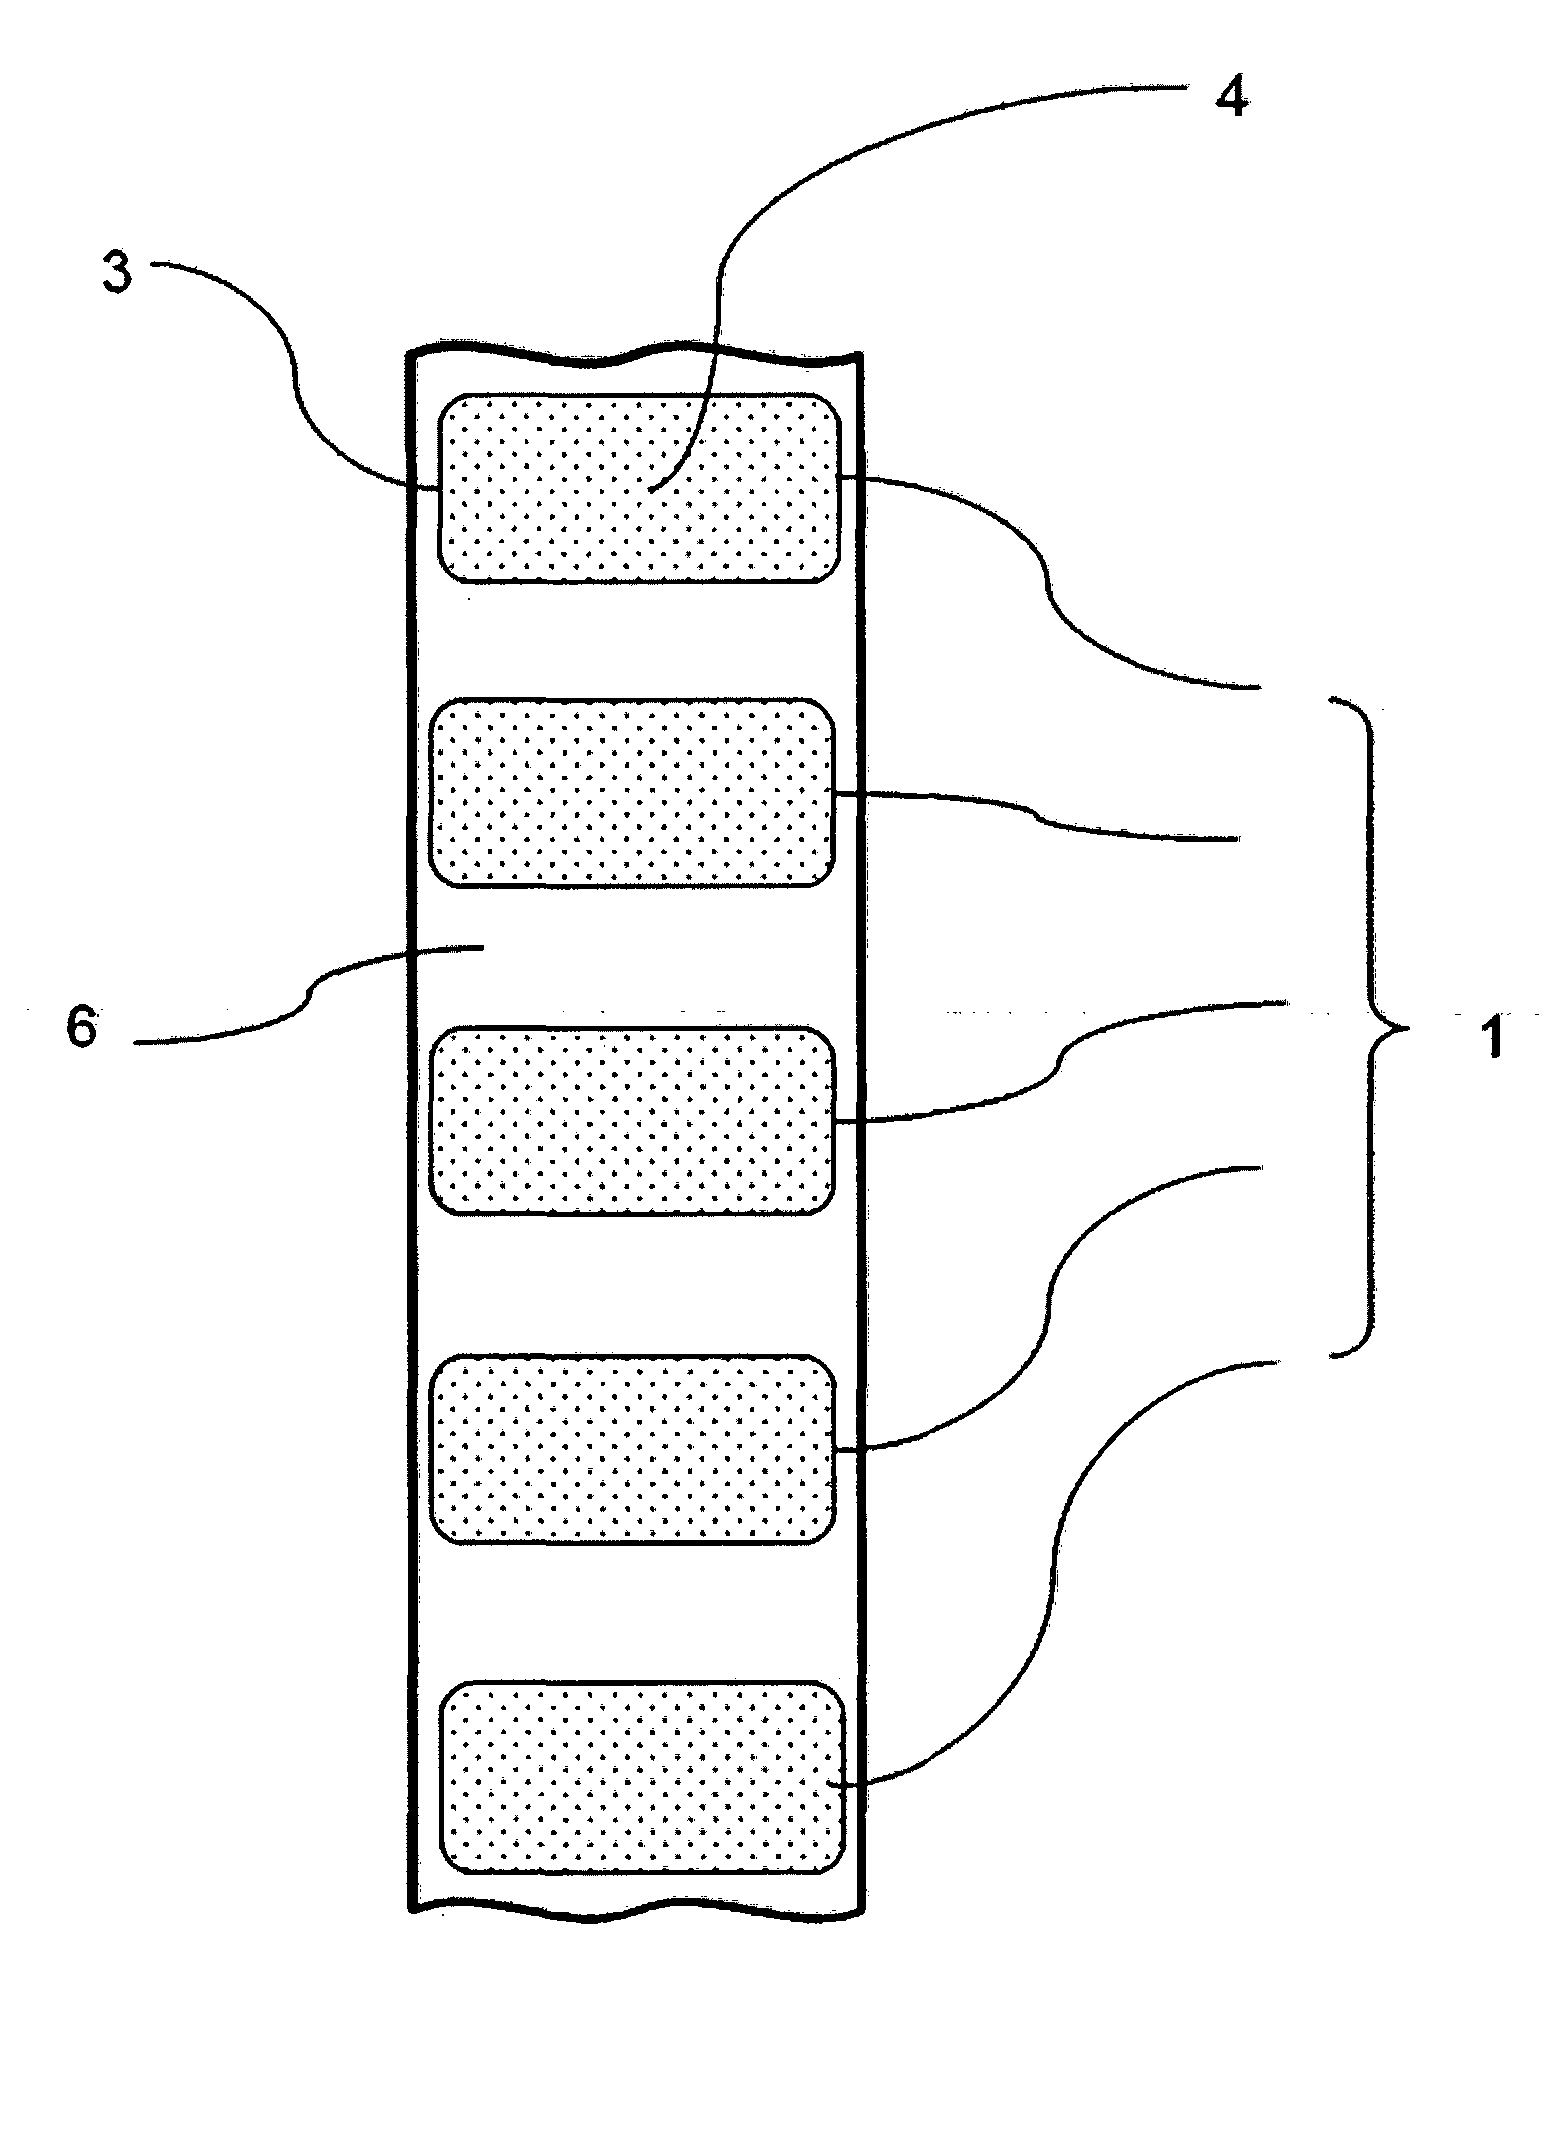 Electrode sensor kit, electrode assembly, and topical preparation for establishing electrical contact with skin, use thereof, and method of electro-impedance tomography (EIT) imaging using these